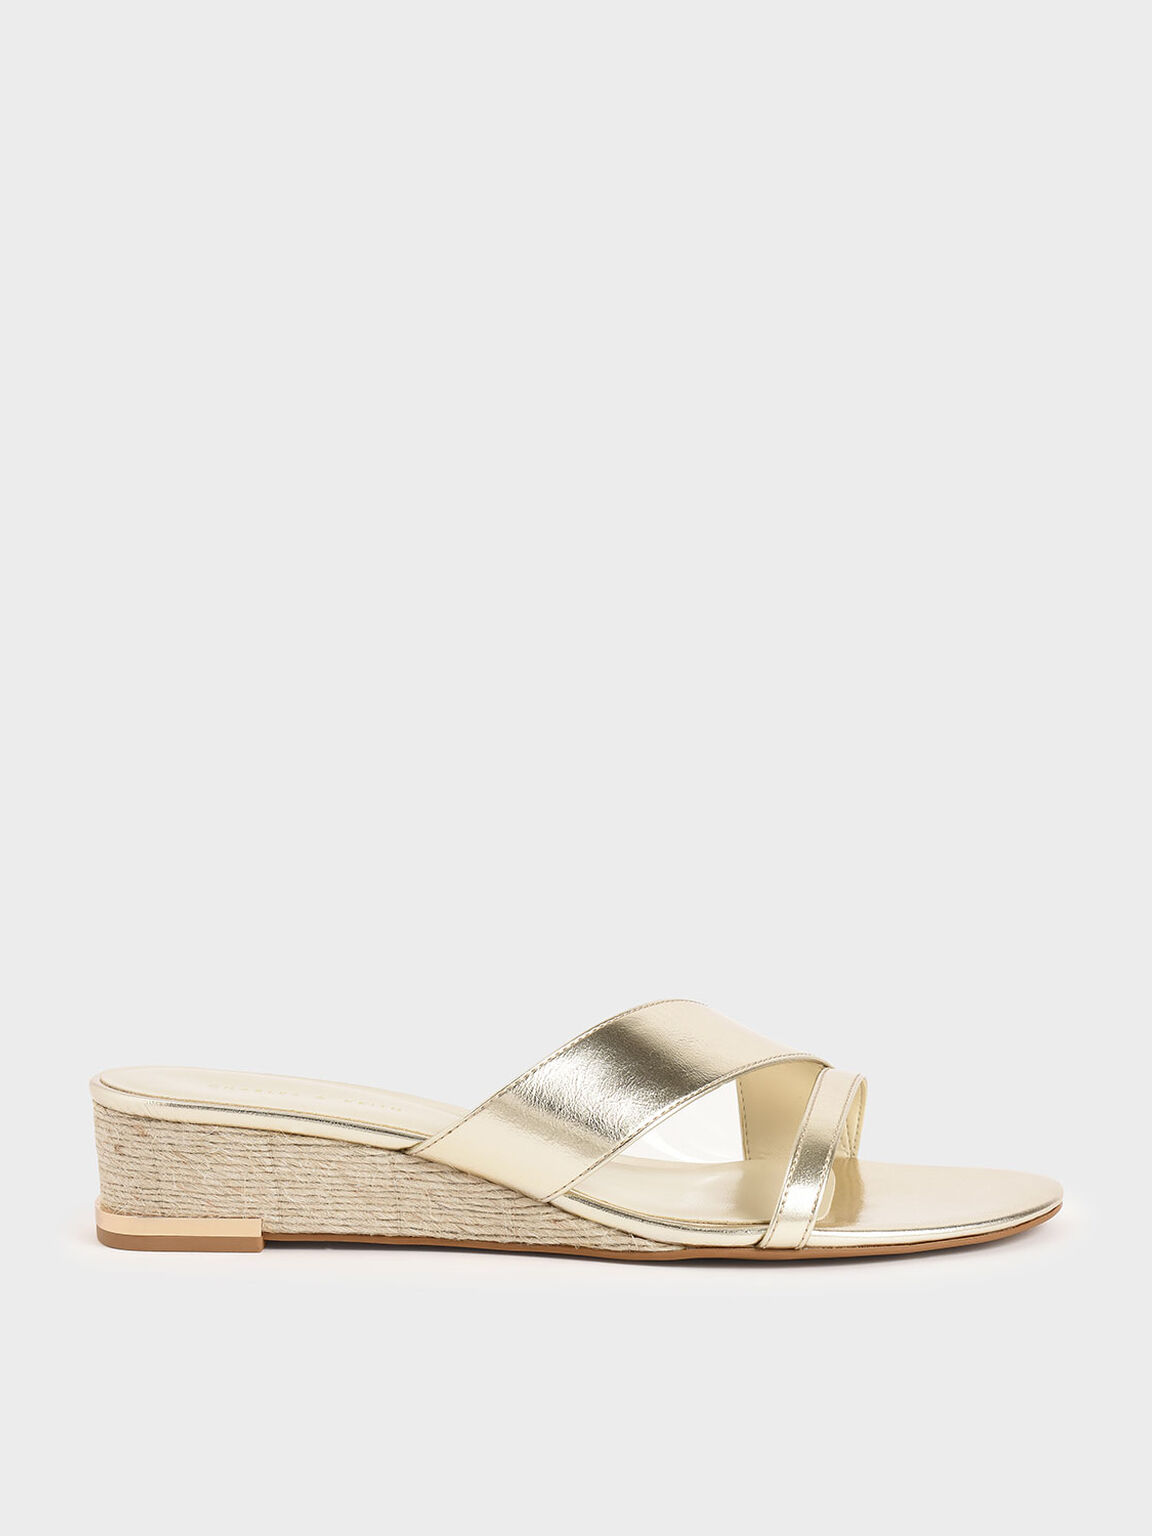 Metallic Strappy Wedges, Gold, hi-res